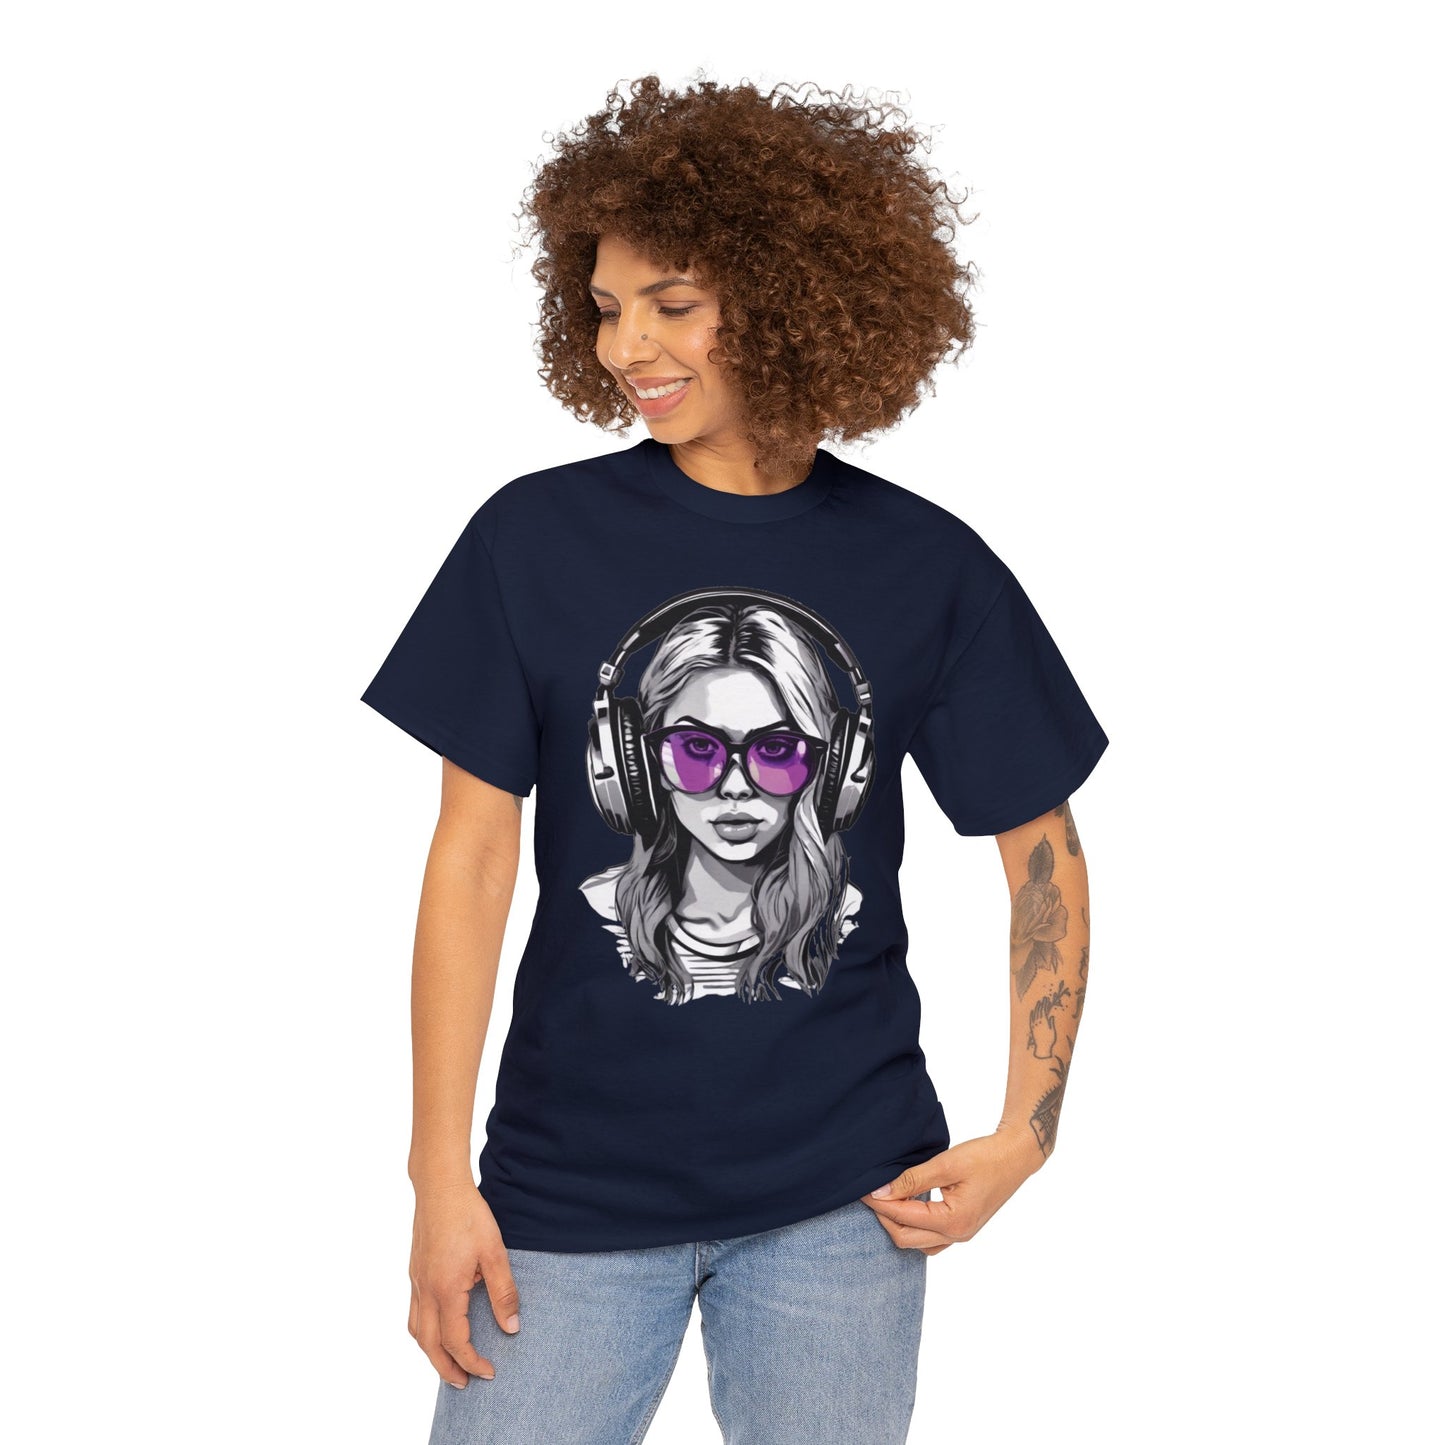 Girl Power T-Shirt: Rock Your Style with Headphones and Sunglasses